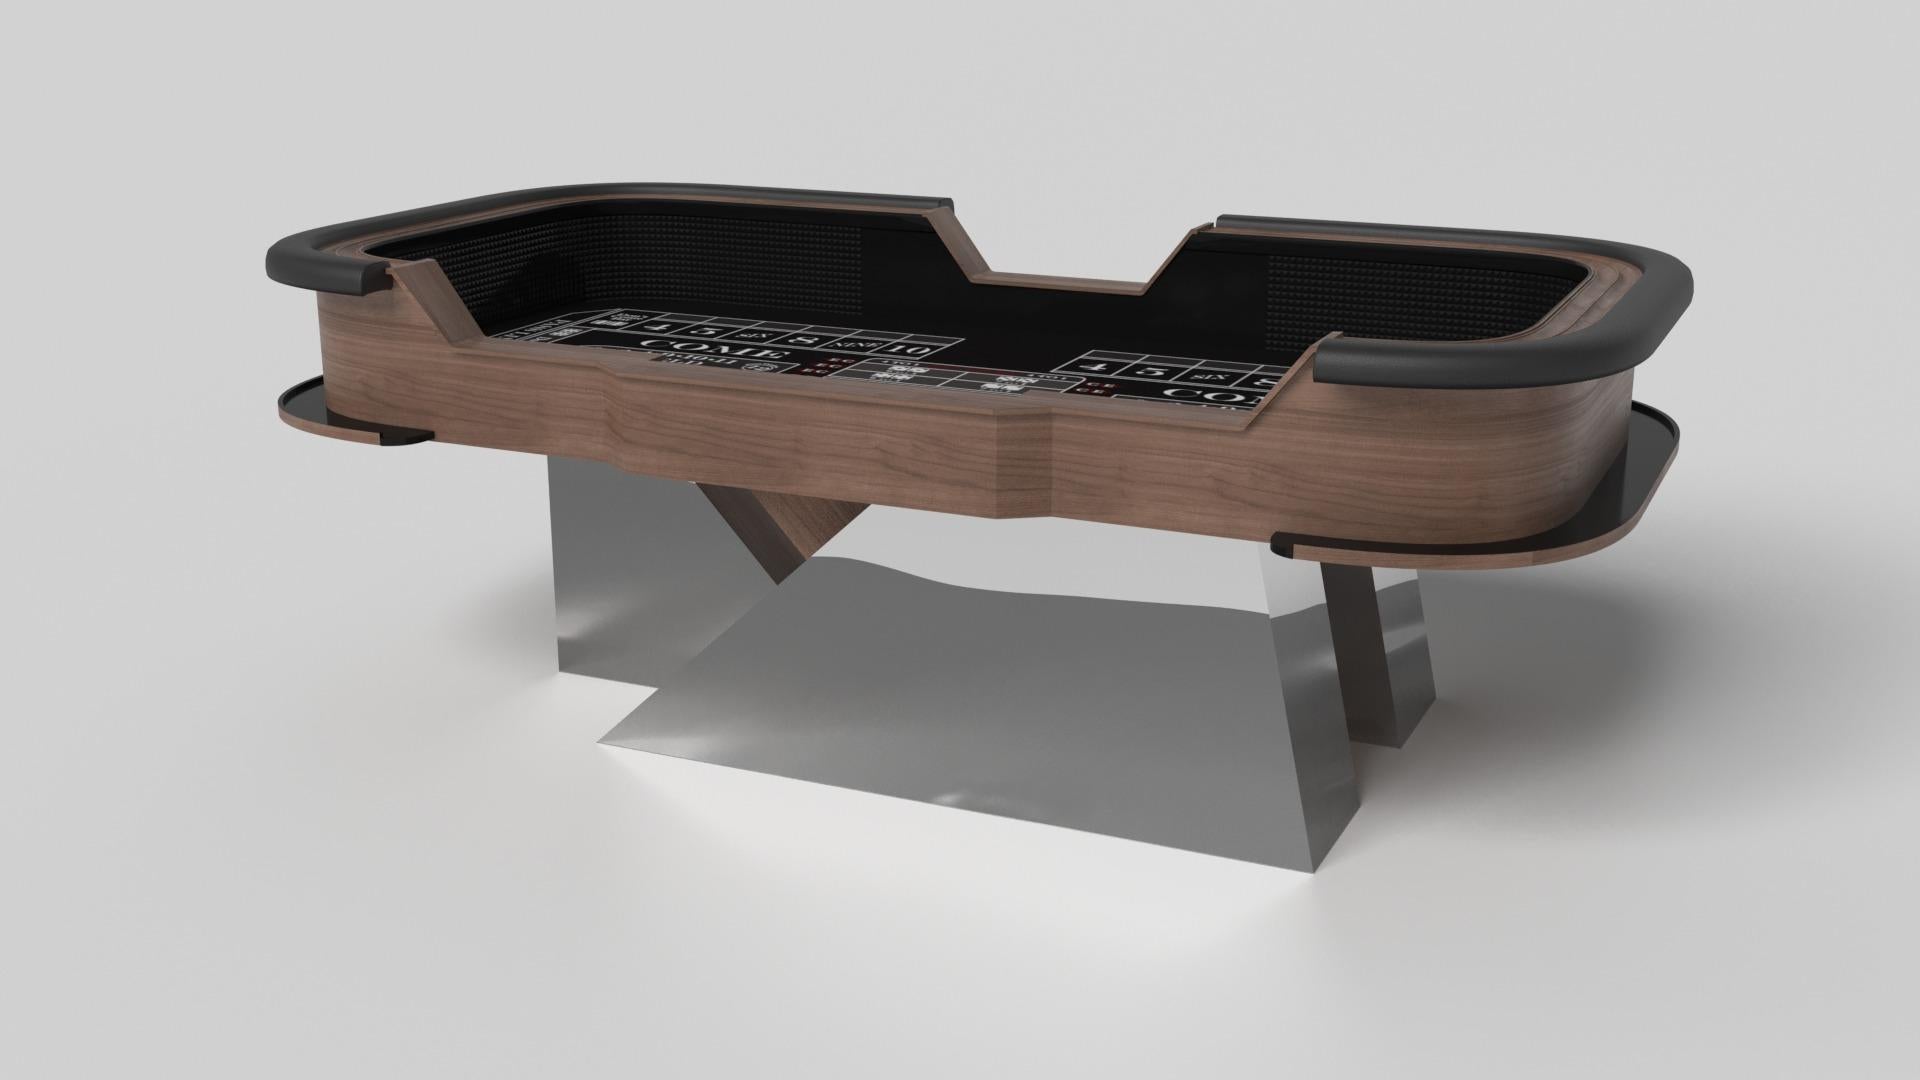 An asymmetric base creates a free-floating silhouette, making the Stilt craps table in walnut a compelling, contemporary addition to the modern home. Detailed with point boxes and betting blocks, this luxury handcrafted game table boasts an